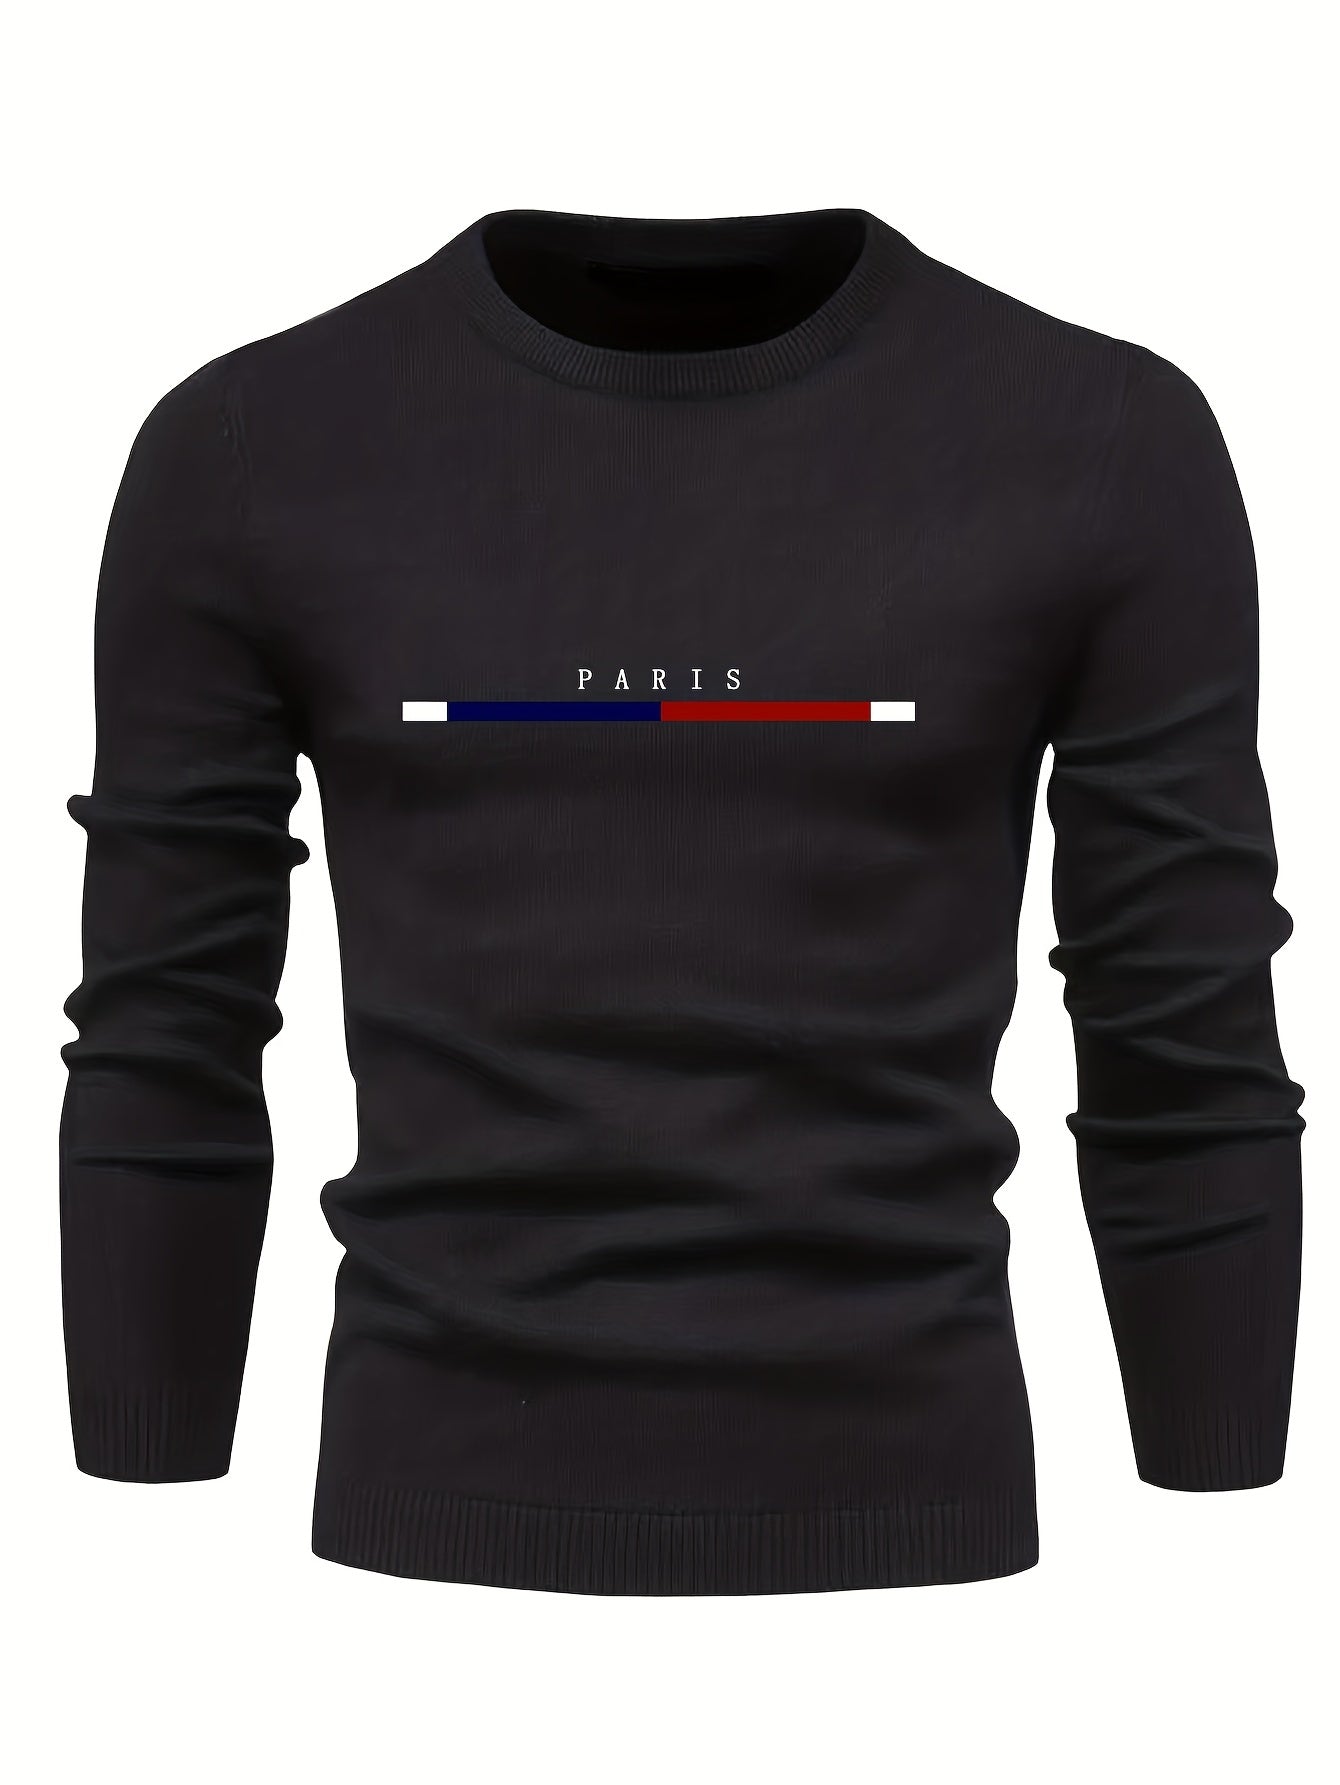 All Match Knitted PARIS Pattern Sweater, Men's Casual Warm Mid Stretch Crew Neck Pullover Sweater For Men Fall Winter